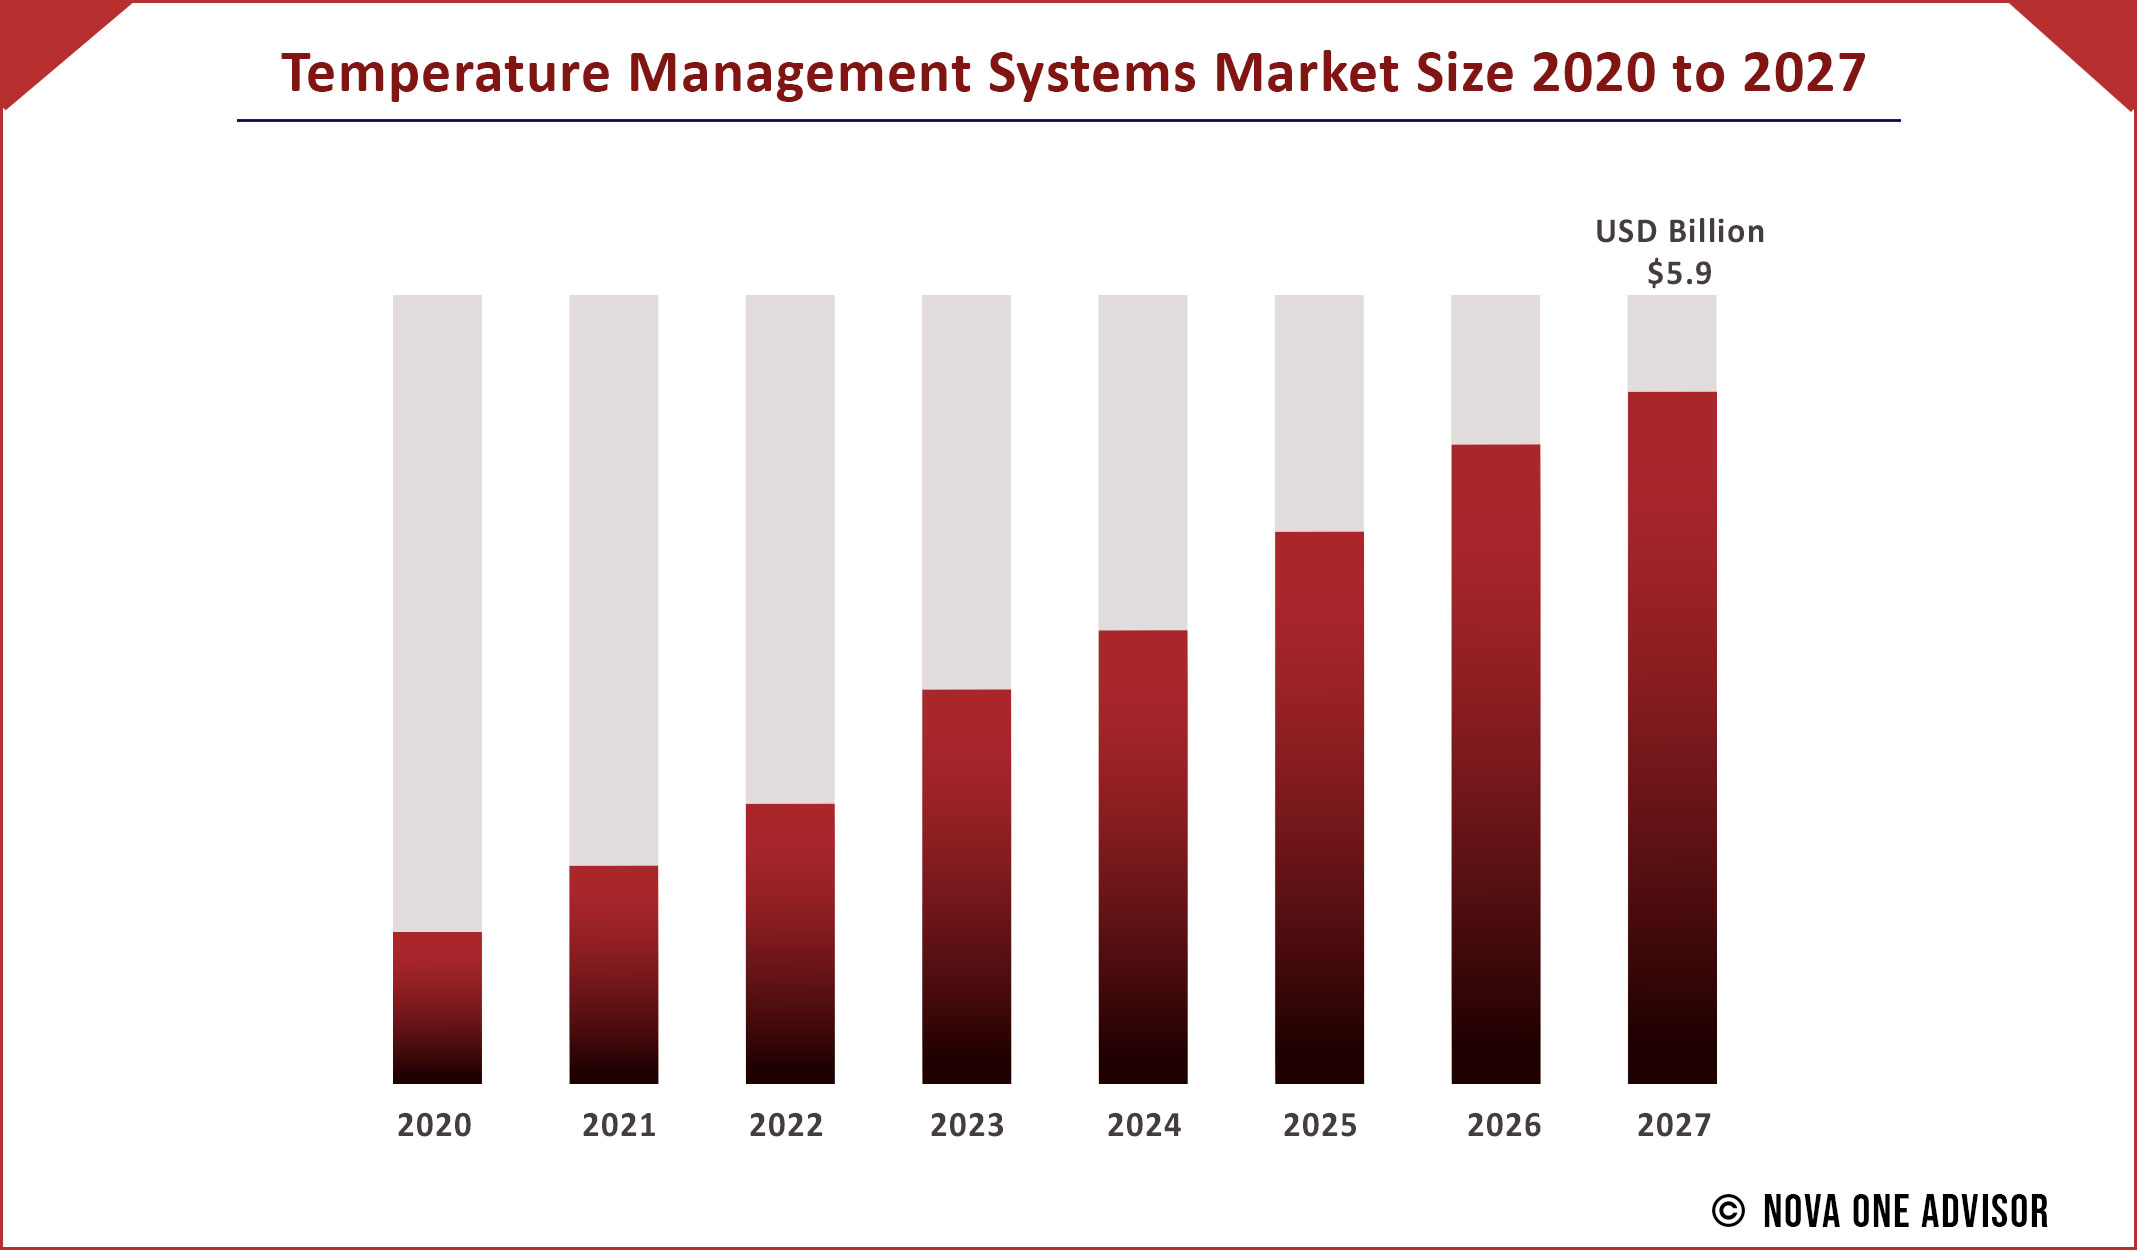 Temperature Management Systems Market Size 2020 to 2027